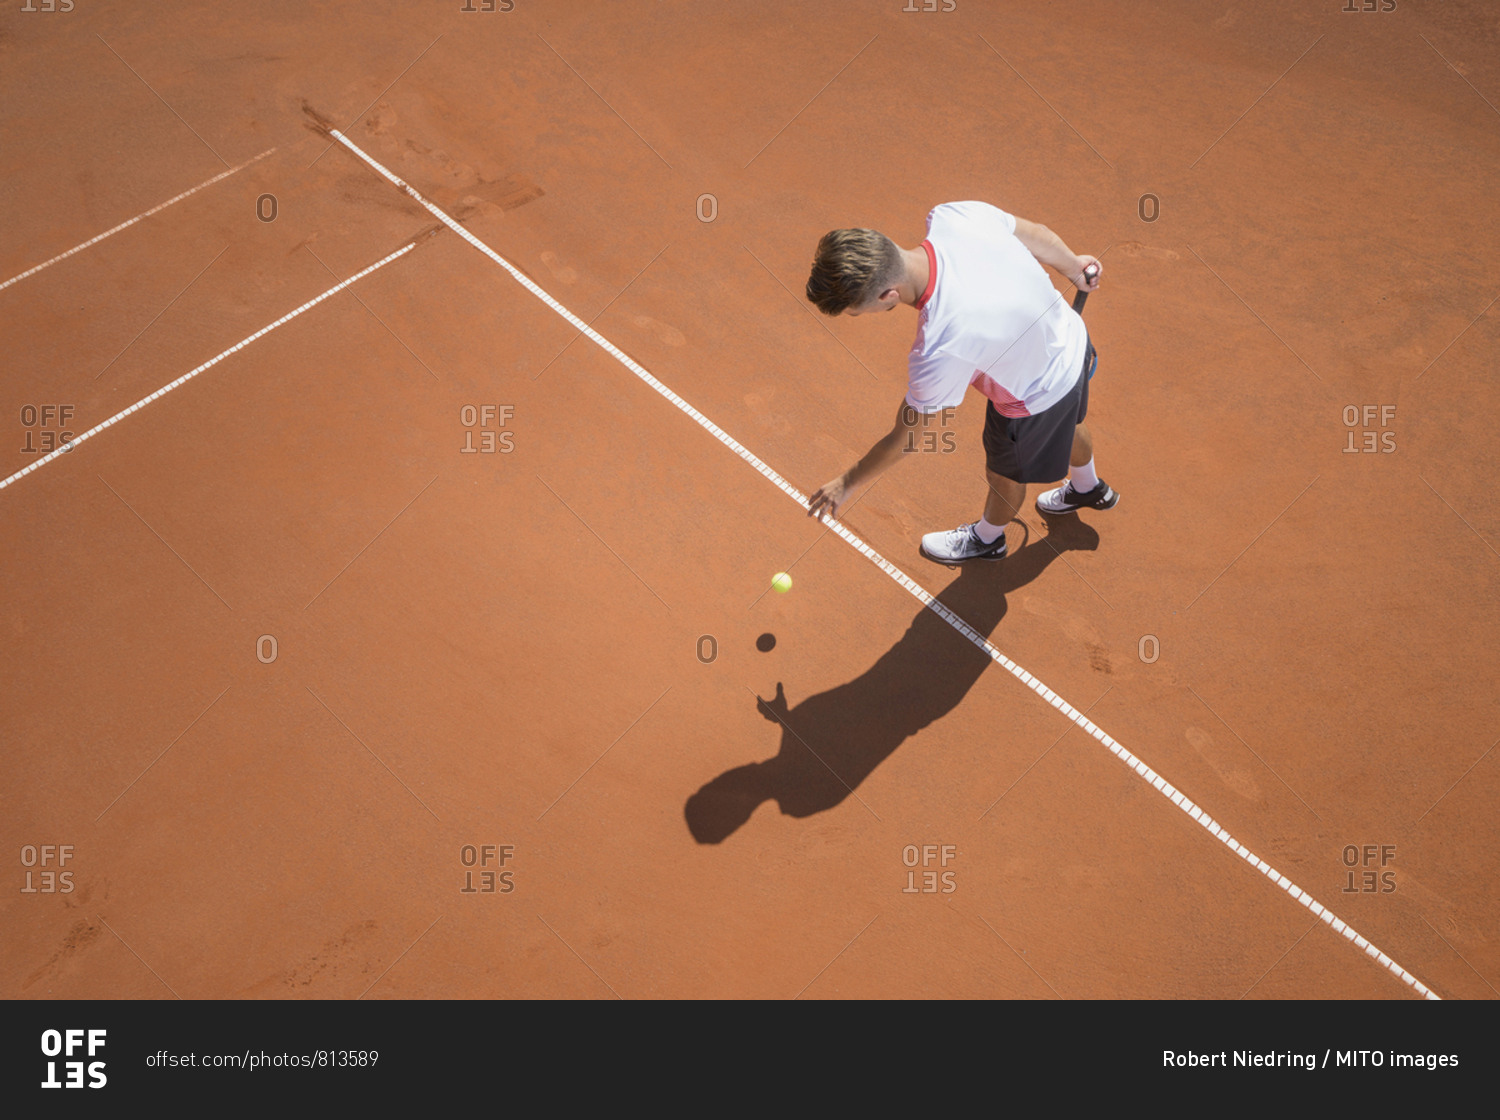 Young male tennis player preparing to serve the ball on sunny red tennis court, Bavaria, Germany